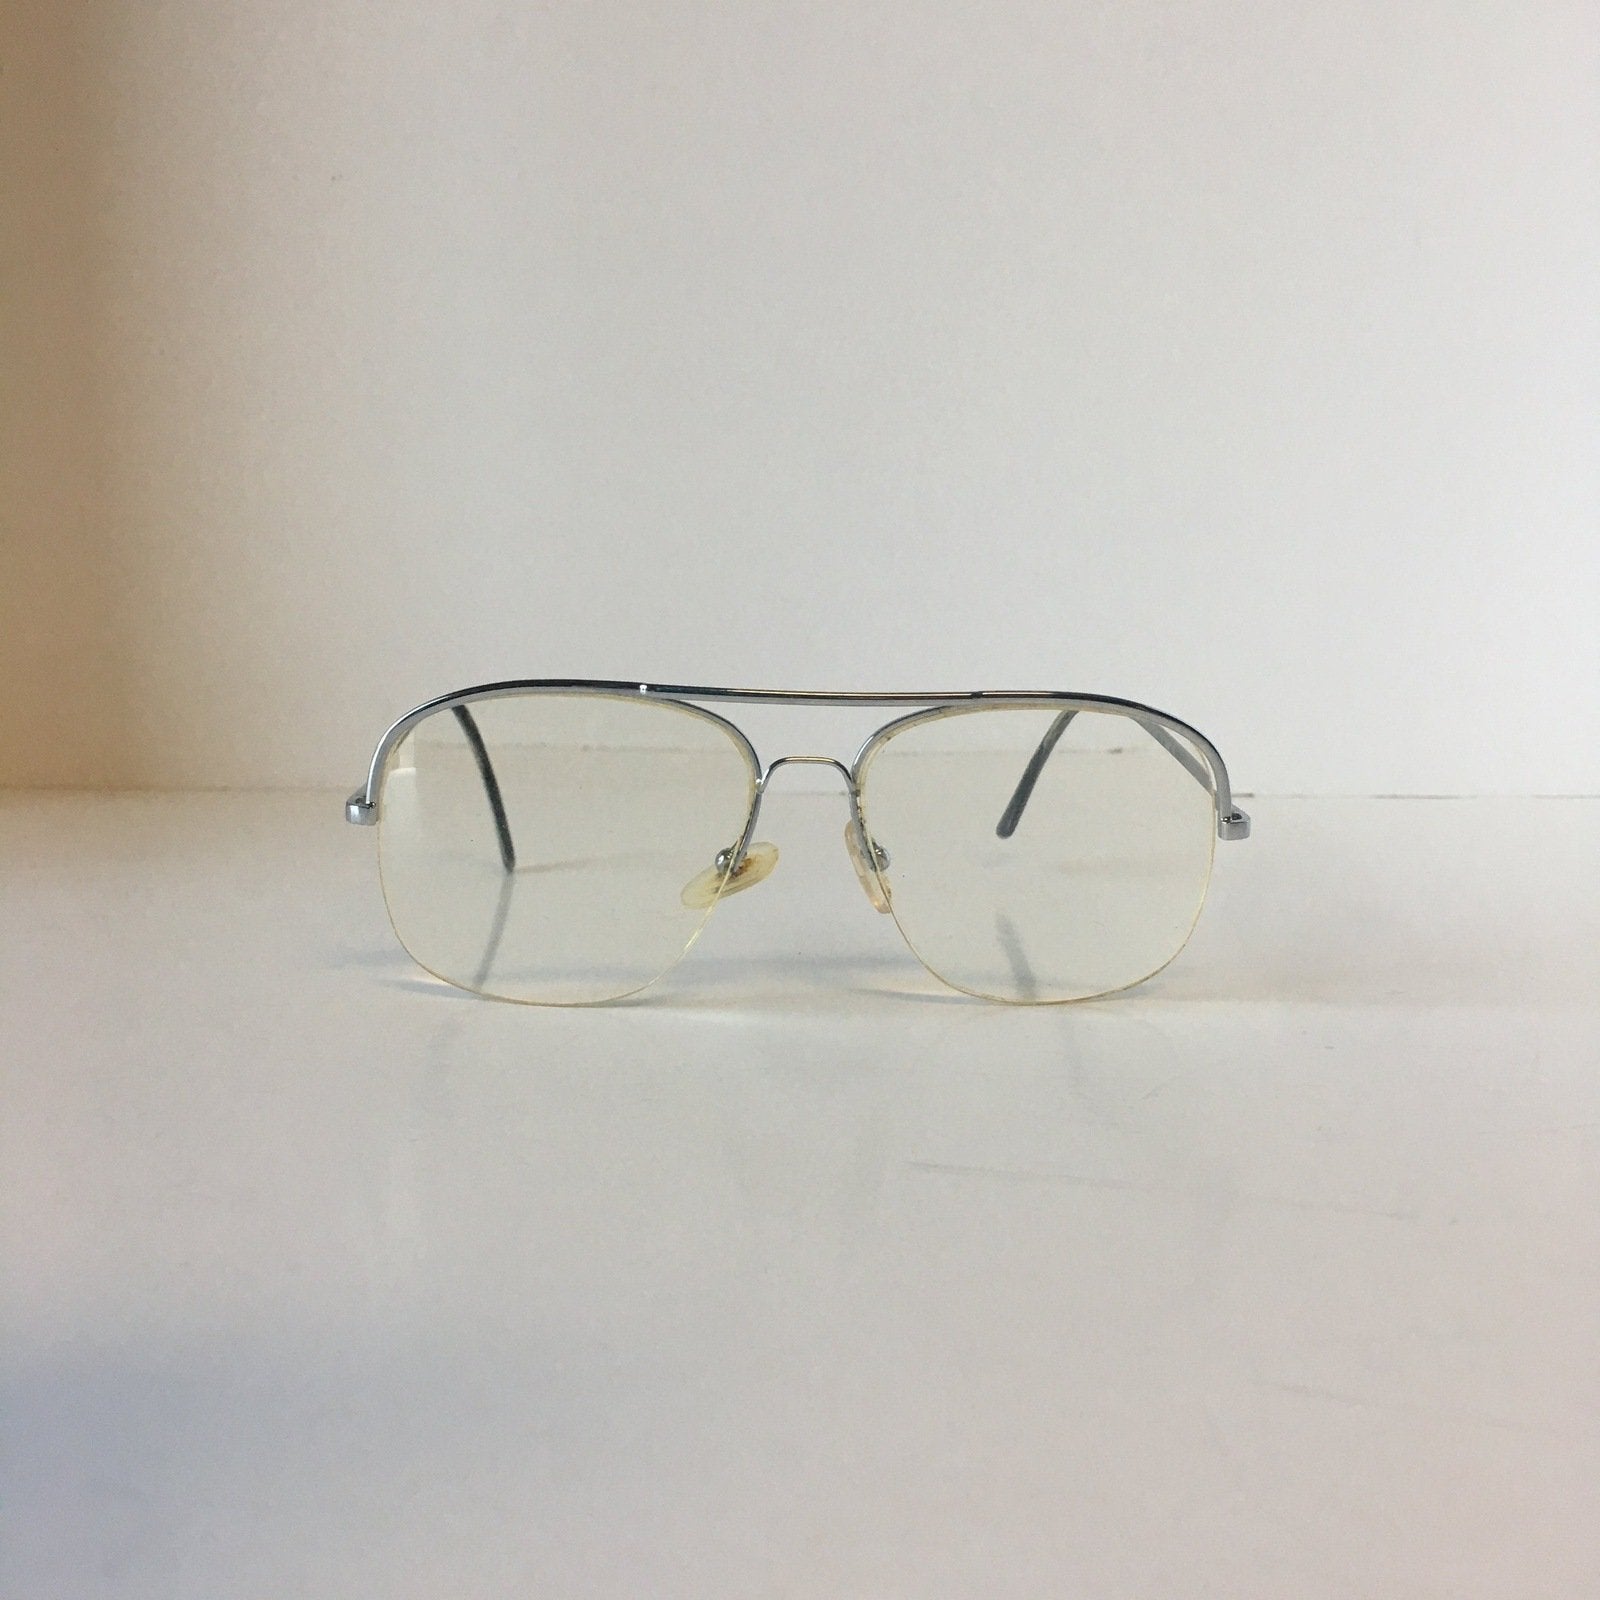 Retro Chic: Authentic Vintage Eyewear with Silver Metal Frame